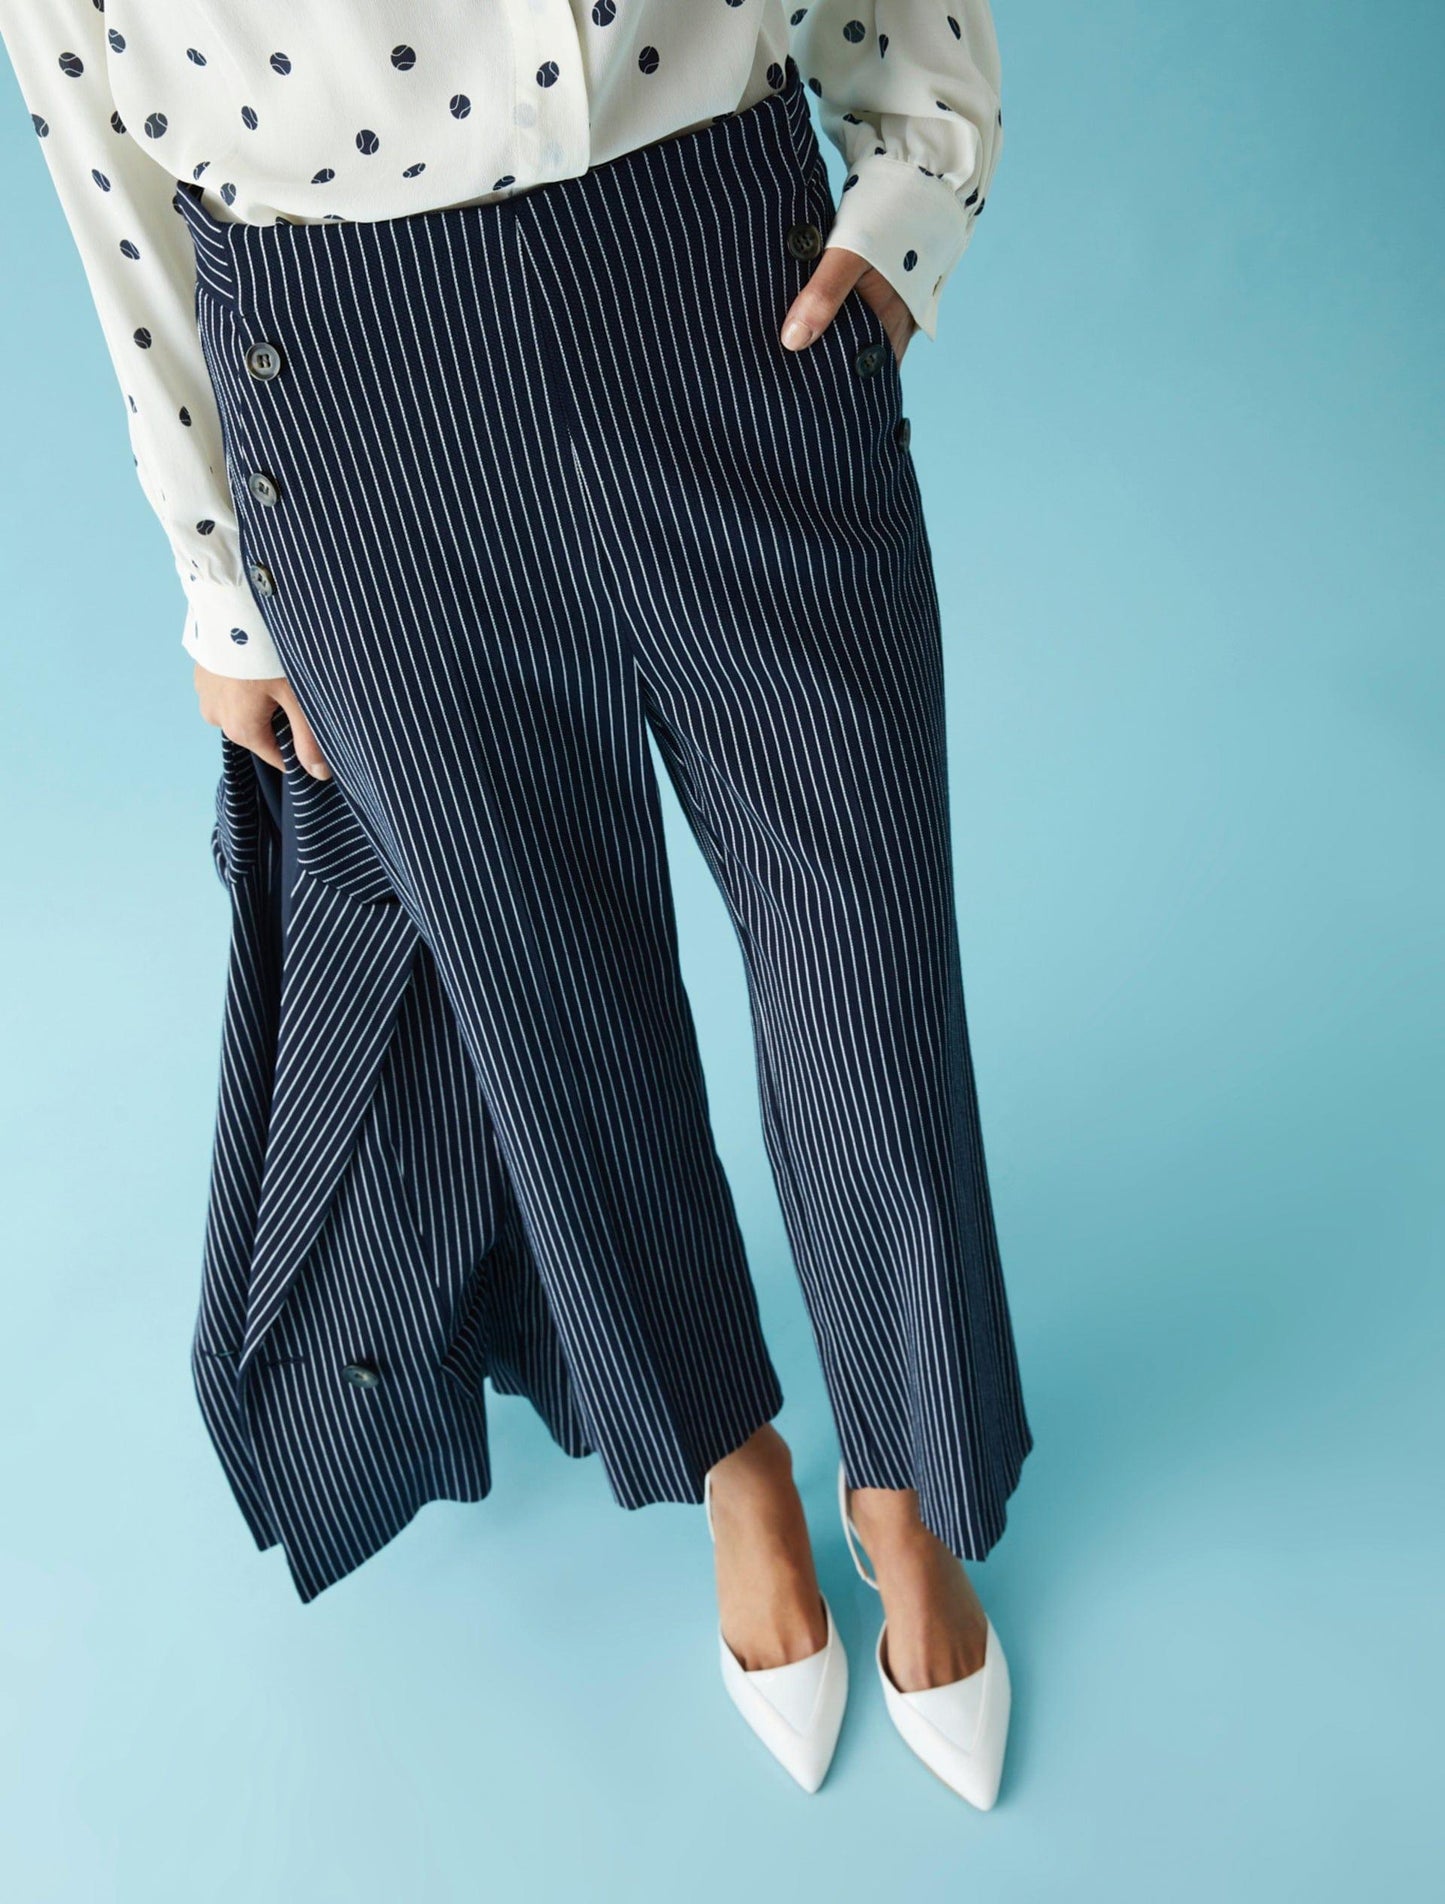 iBLUES Bootcut Trousers in Navy Pinstripe